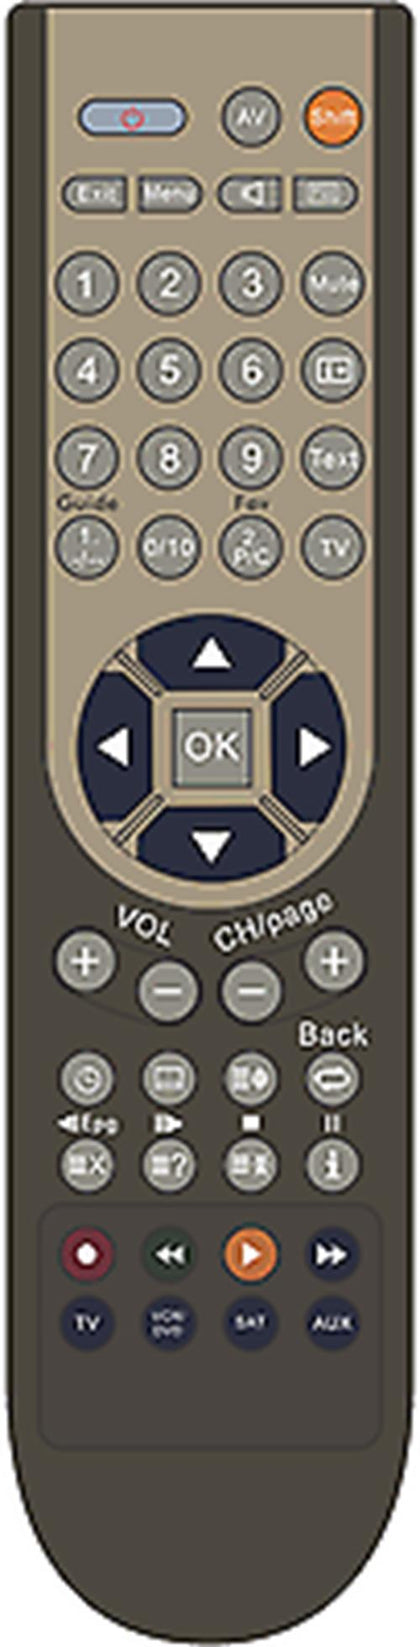 Replacement Remote Control for Digitrex CFD2271 CFD2271